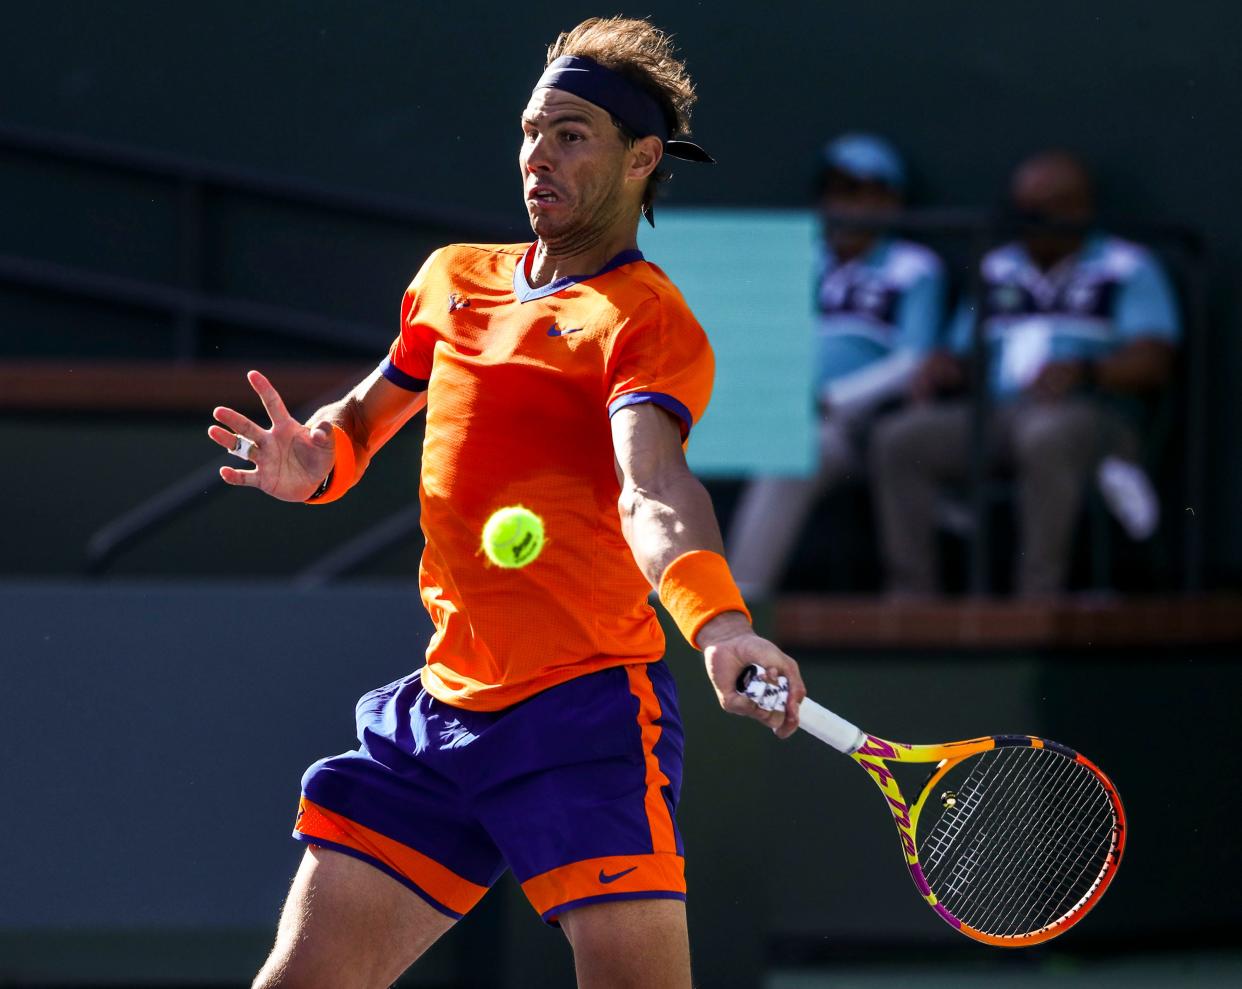 Rafael Nadal of Spain hits a shot to Taylor Fritz of the United States during the ATP singles final at the BNP Paribas Open at the Indian Wells Tennis Garden in Indian Wells, Calif., Sunday, March 20, 2022. 